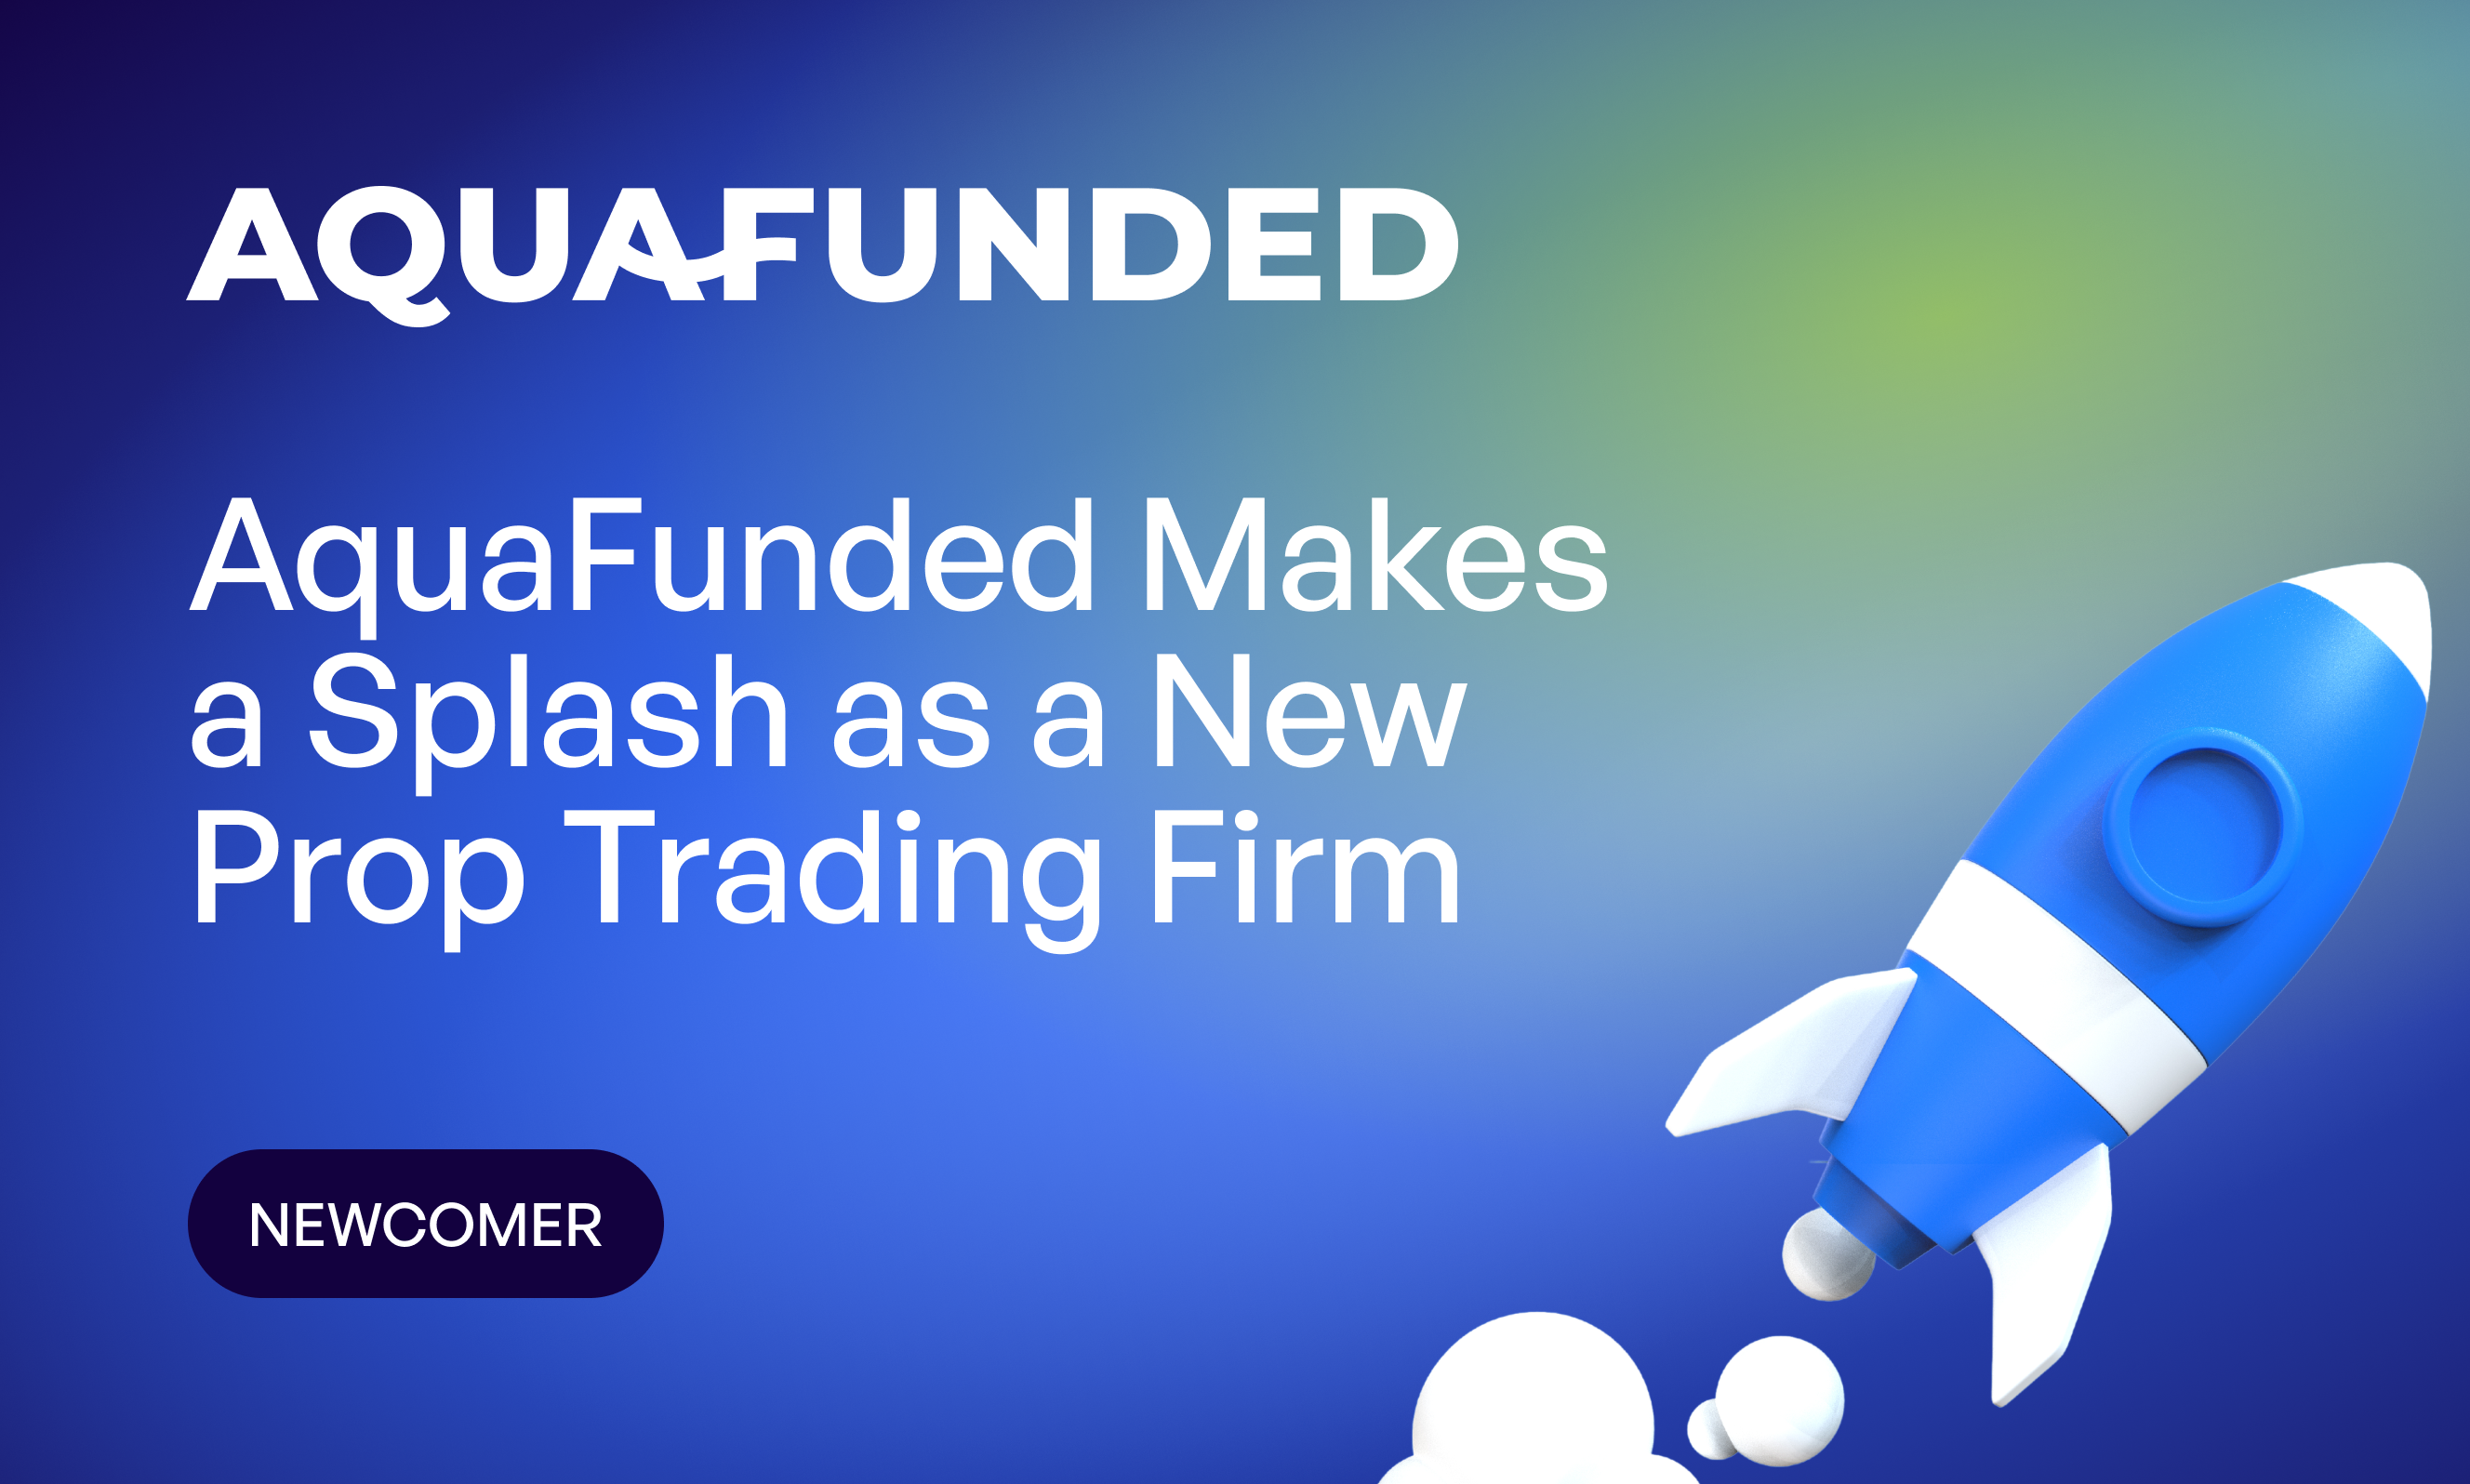 AquaFunded Makes a Splash as a New Prop Trading Firm